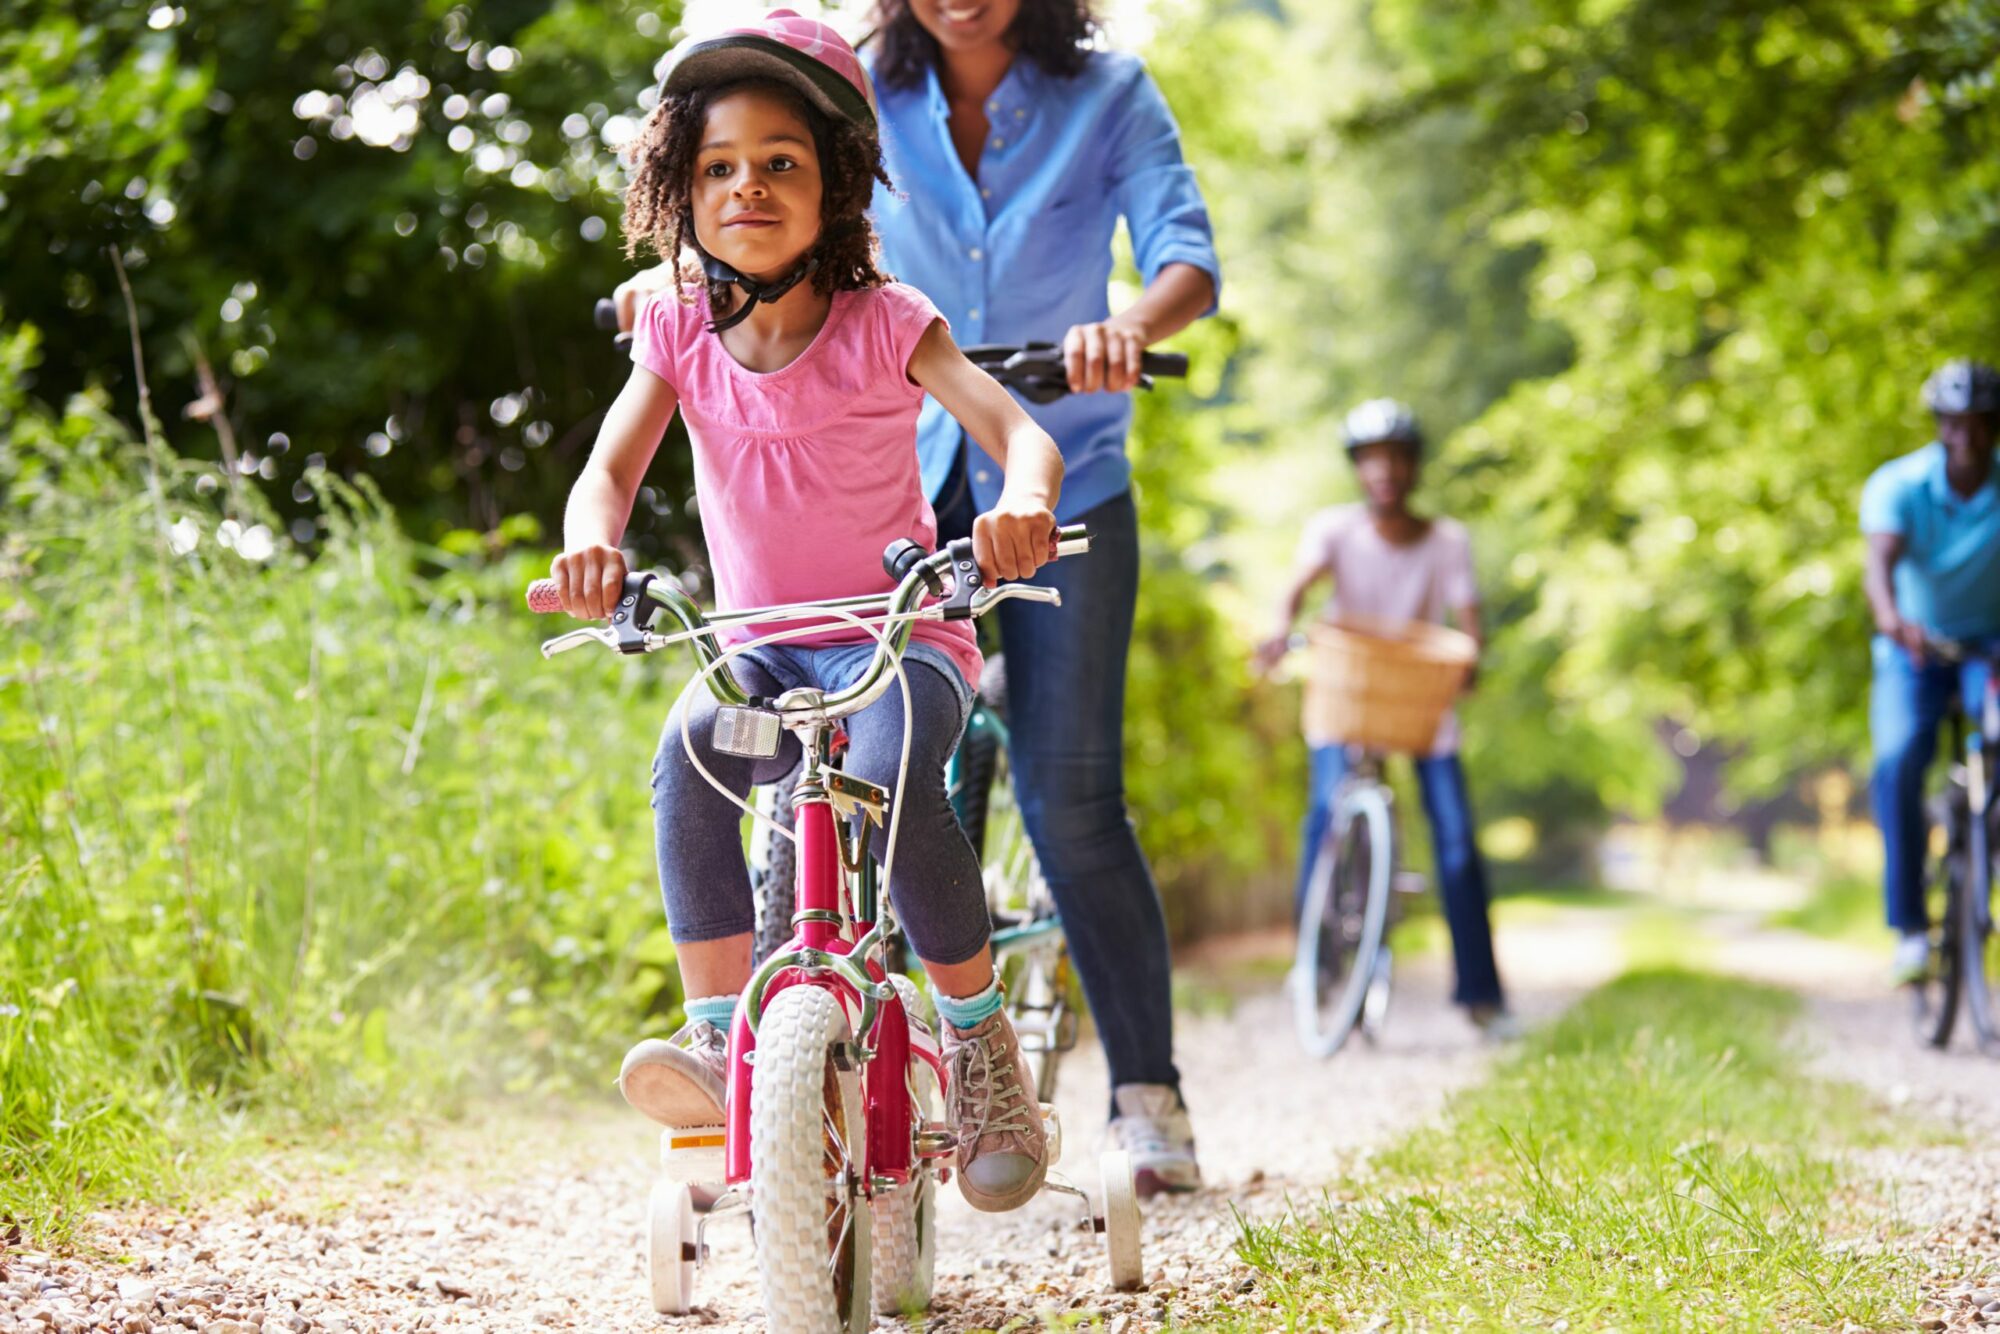 Family summer safety Cycle Ride with helmets